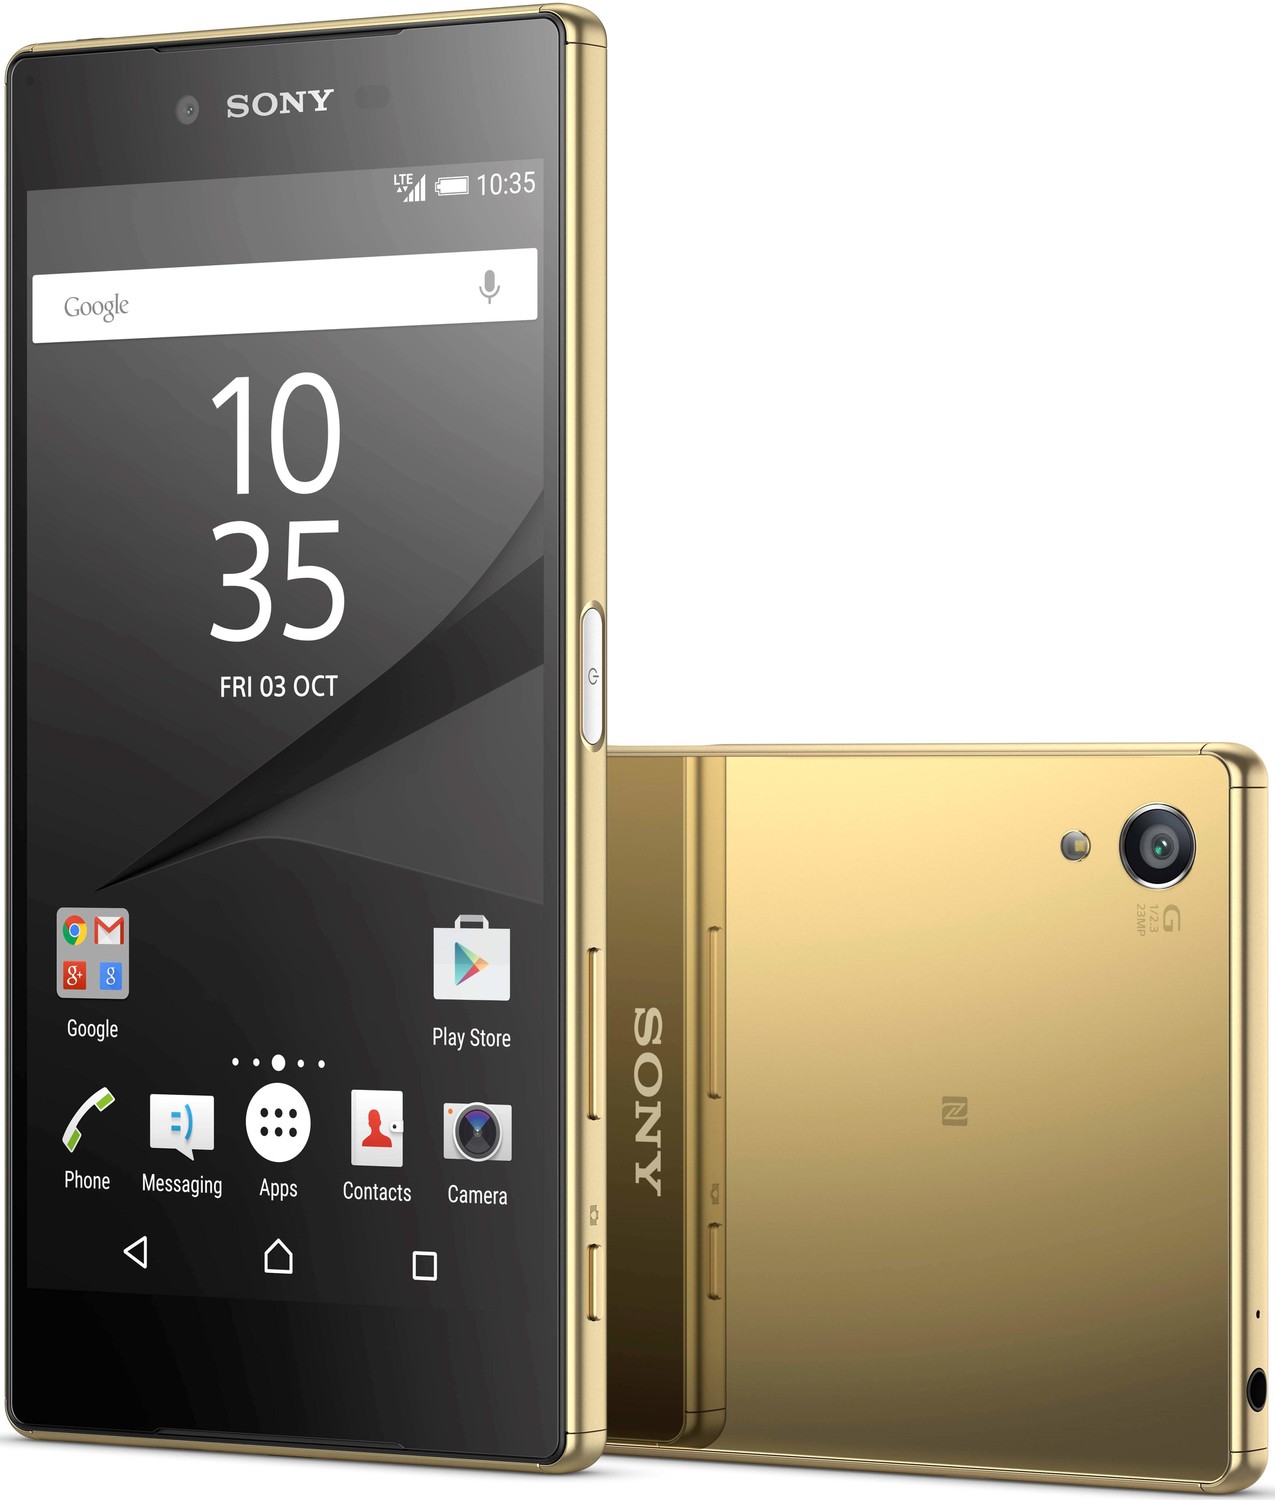 Xperia Z5 Dual - Specs and Phonegg